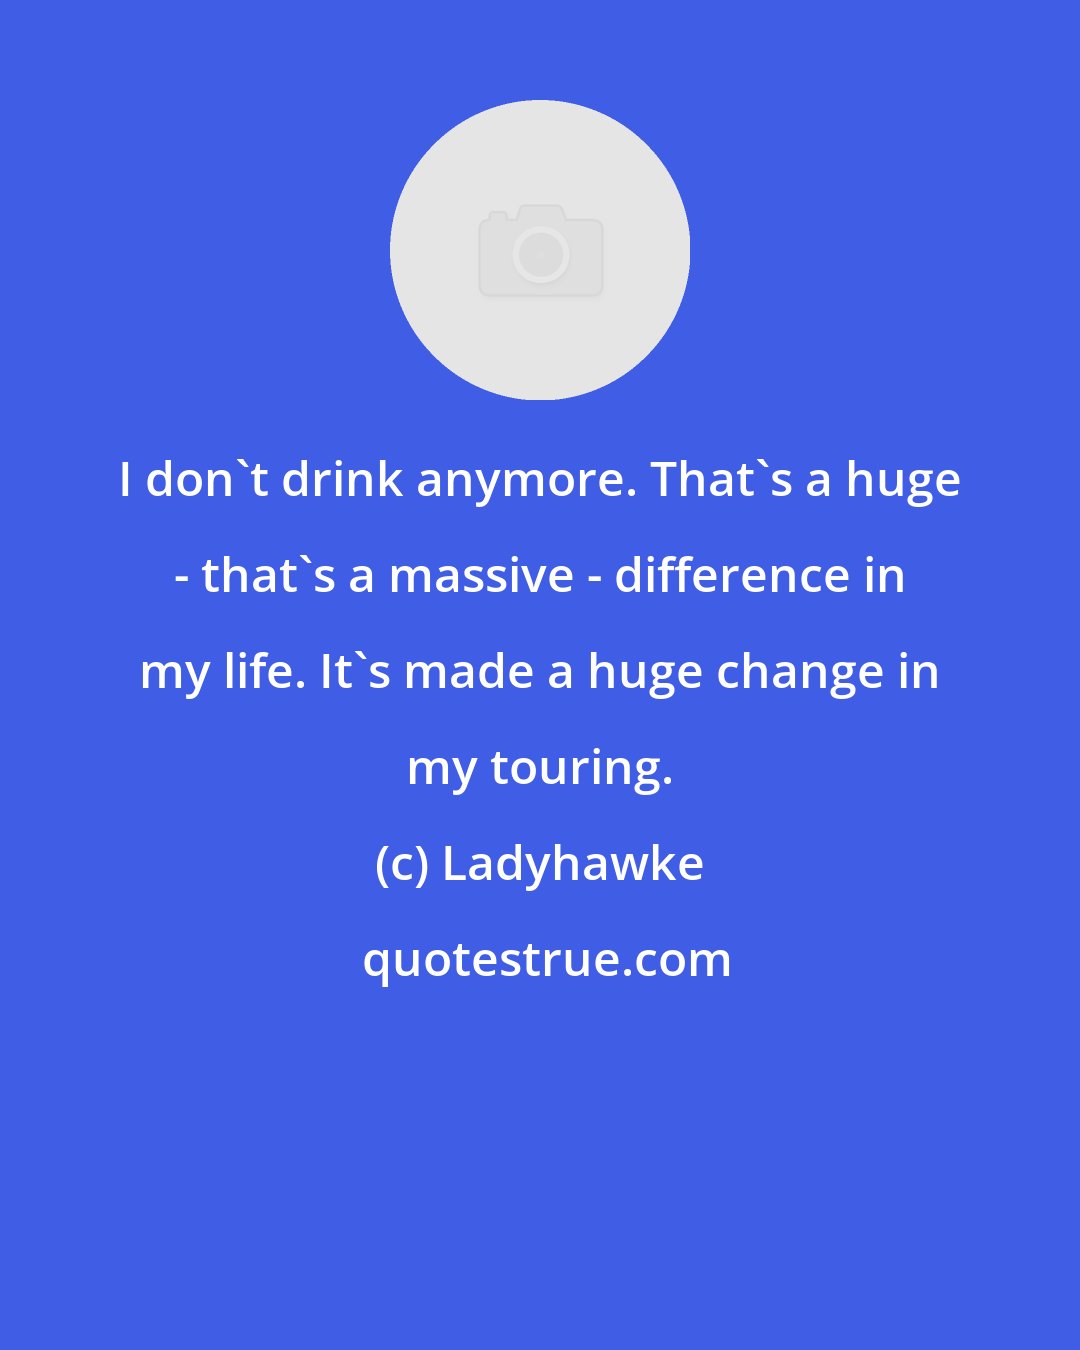 Ladyhawke: I don't drink anymore. That's a huge - that's a massive - difference in my life. It's made a huge change in my touring.